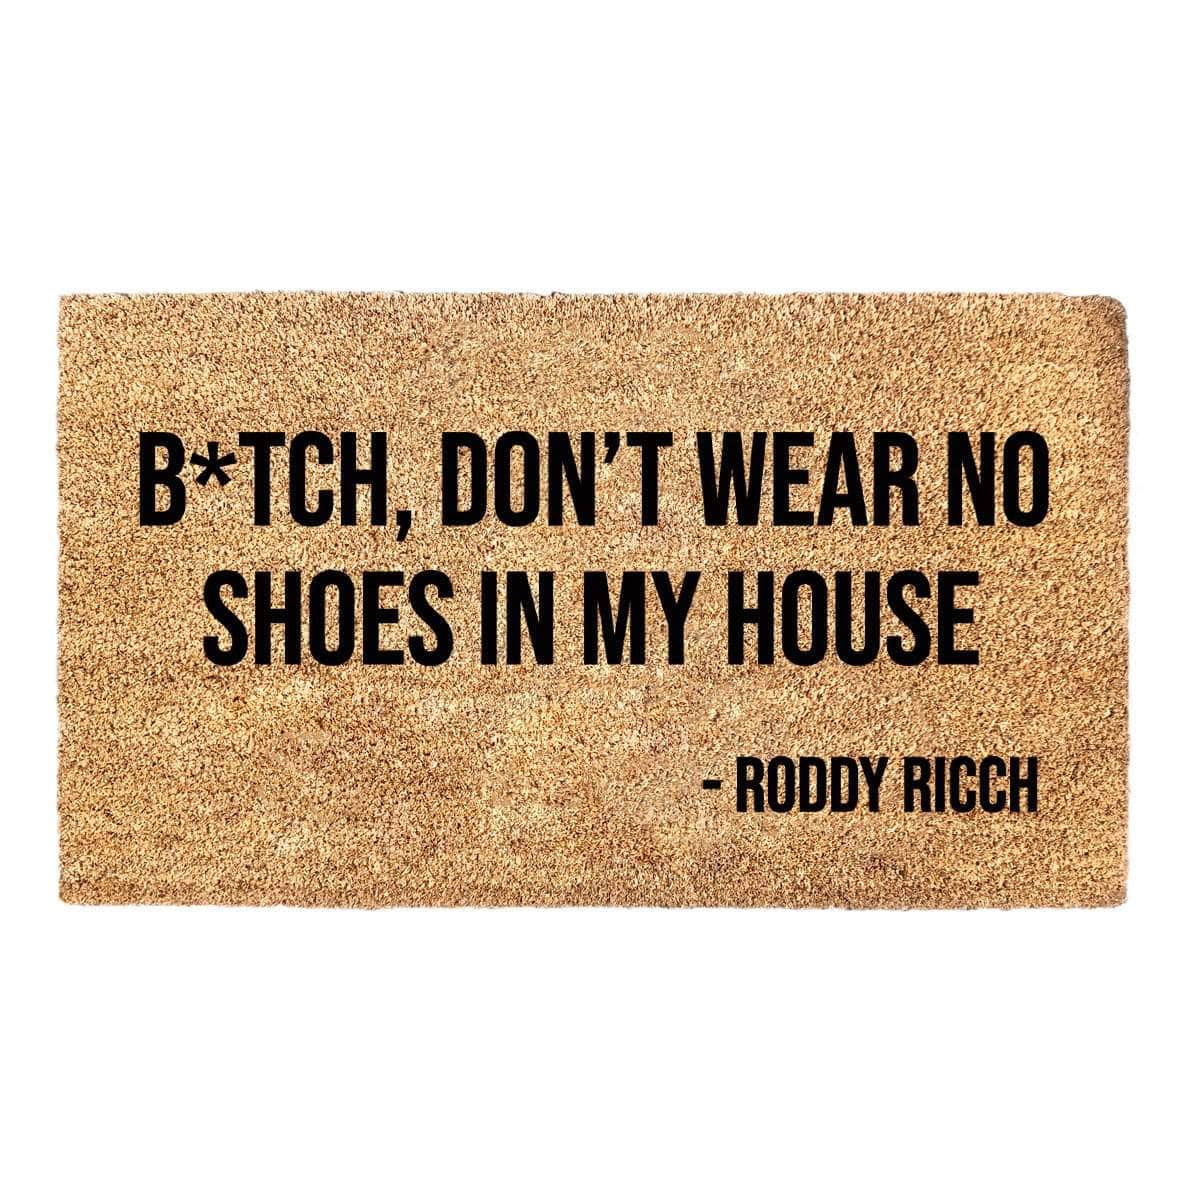 Bold b*tch don't wear no shoes in my house - Roddy Ricch Mat